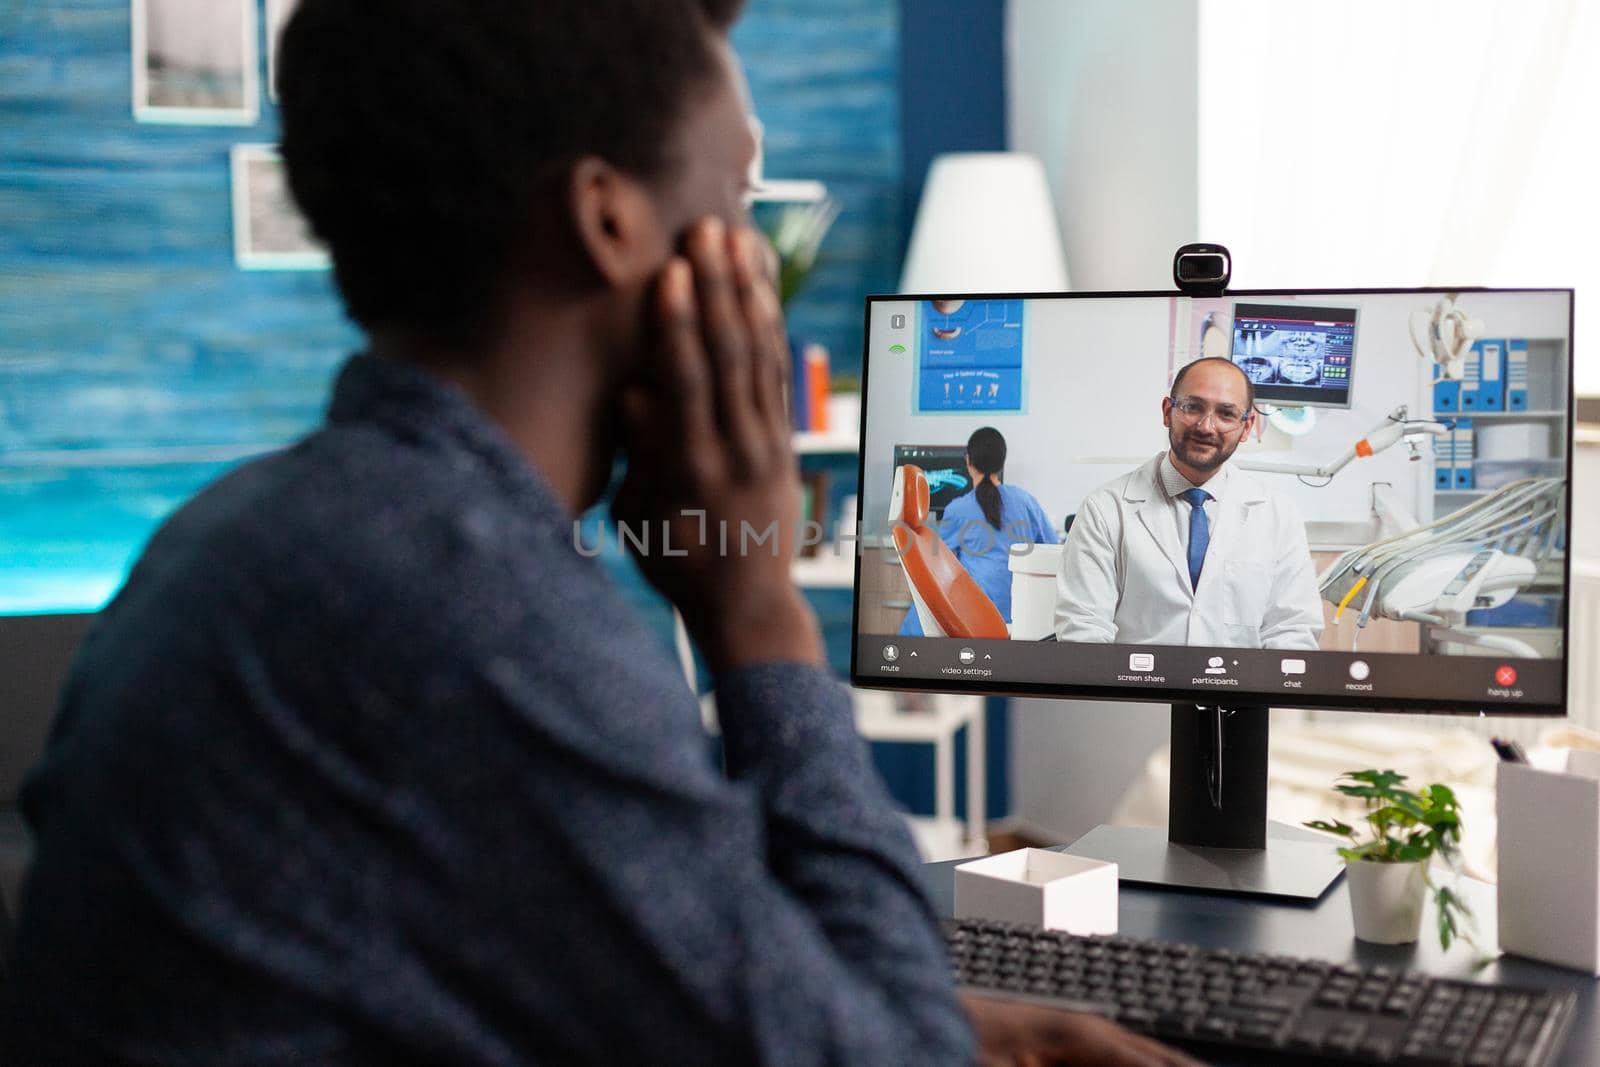 Online health checkup of african american guy talking on video call conference about healthcare sitting at desk. Internet medical consultation of sick patient, virtual telemedicine